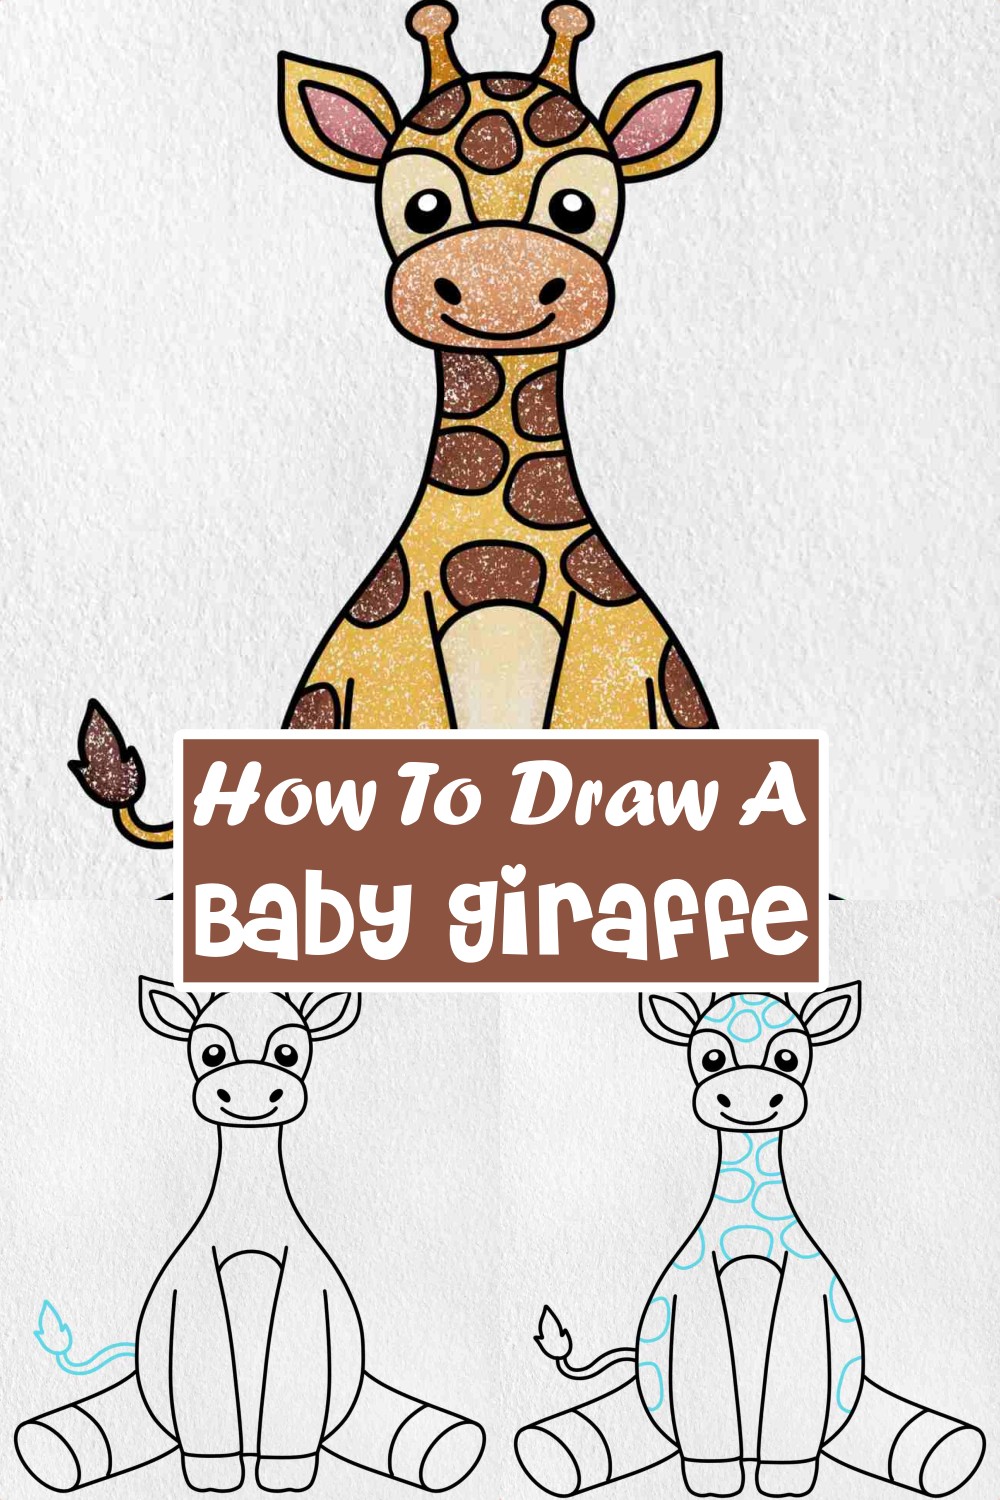 How To Draw A Baby Giraffe